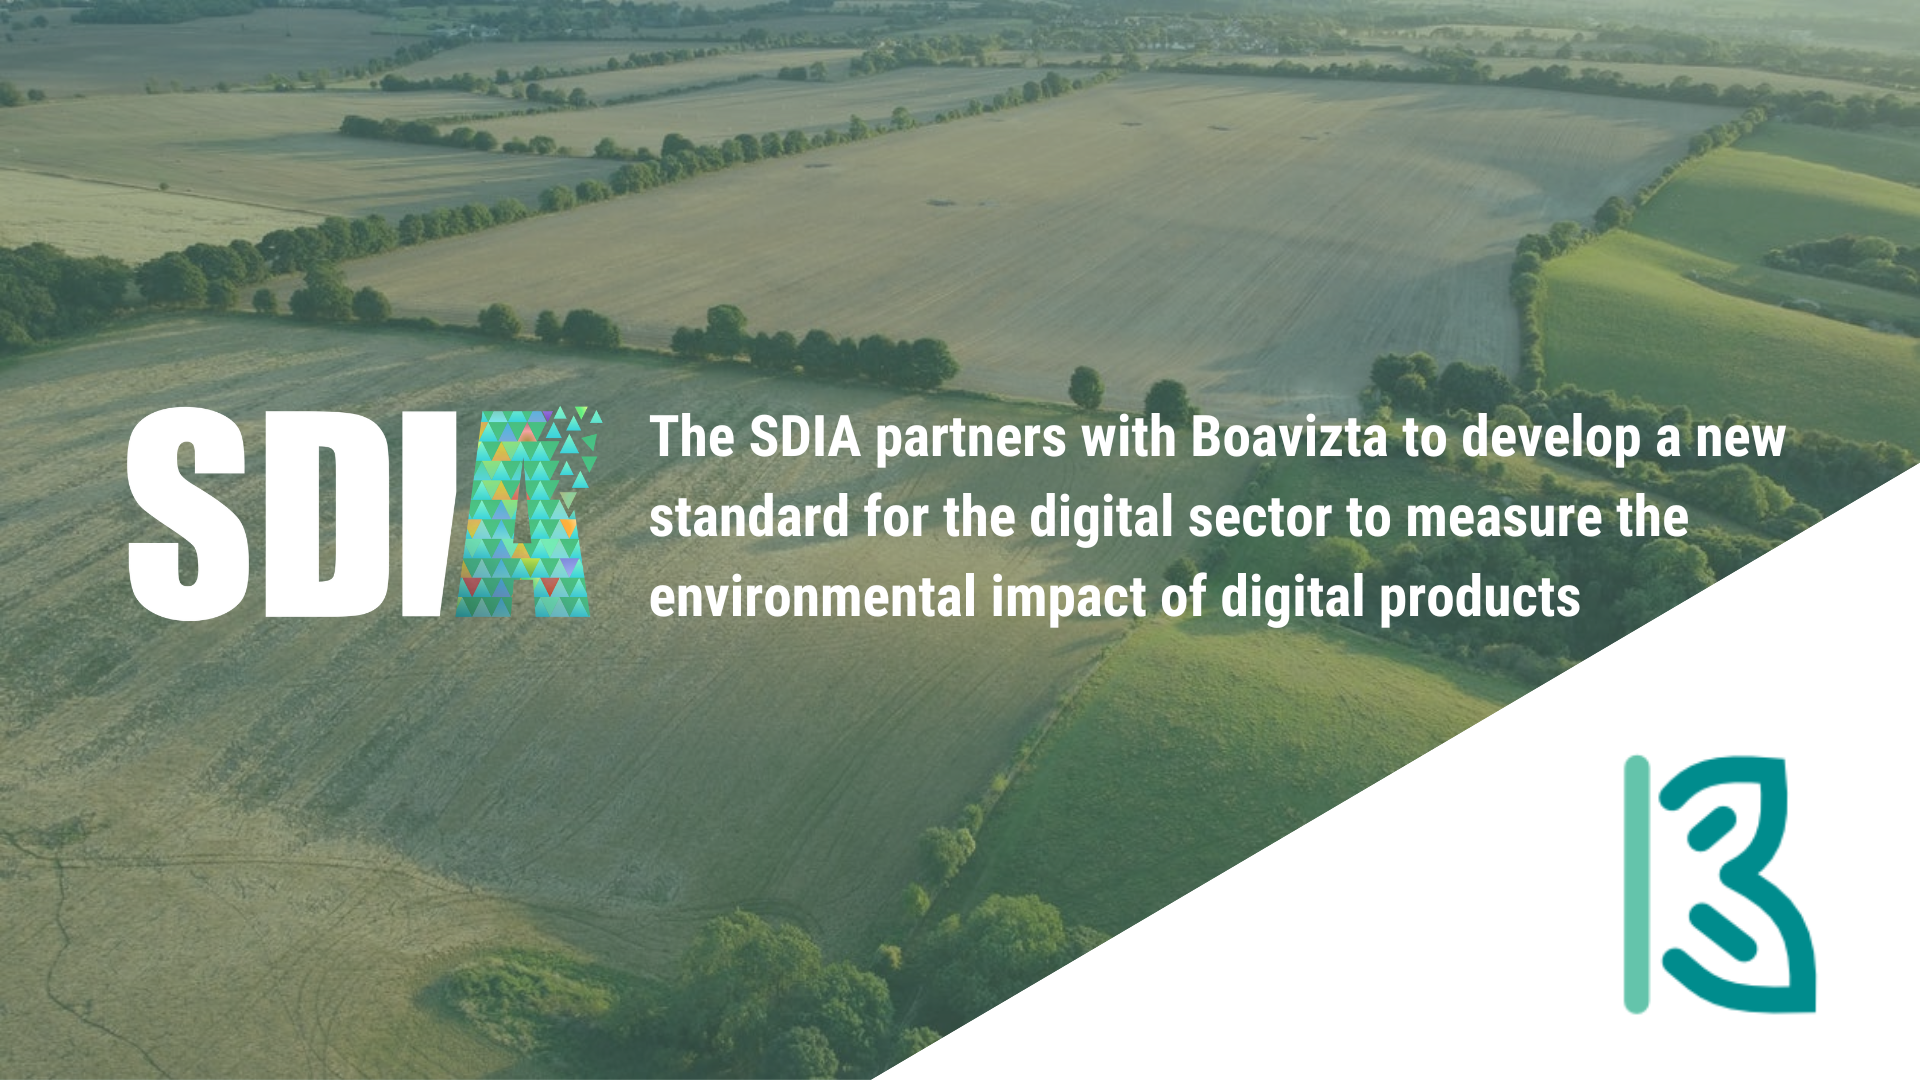 The SDIA partners with Boavizta to develop a new standard for the digital sector to measure the environmental impact of digital products